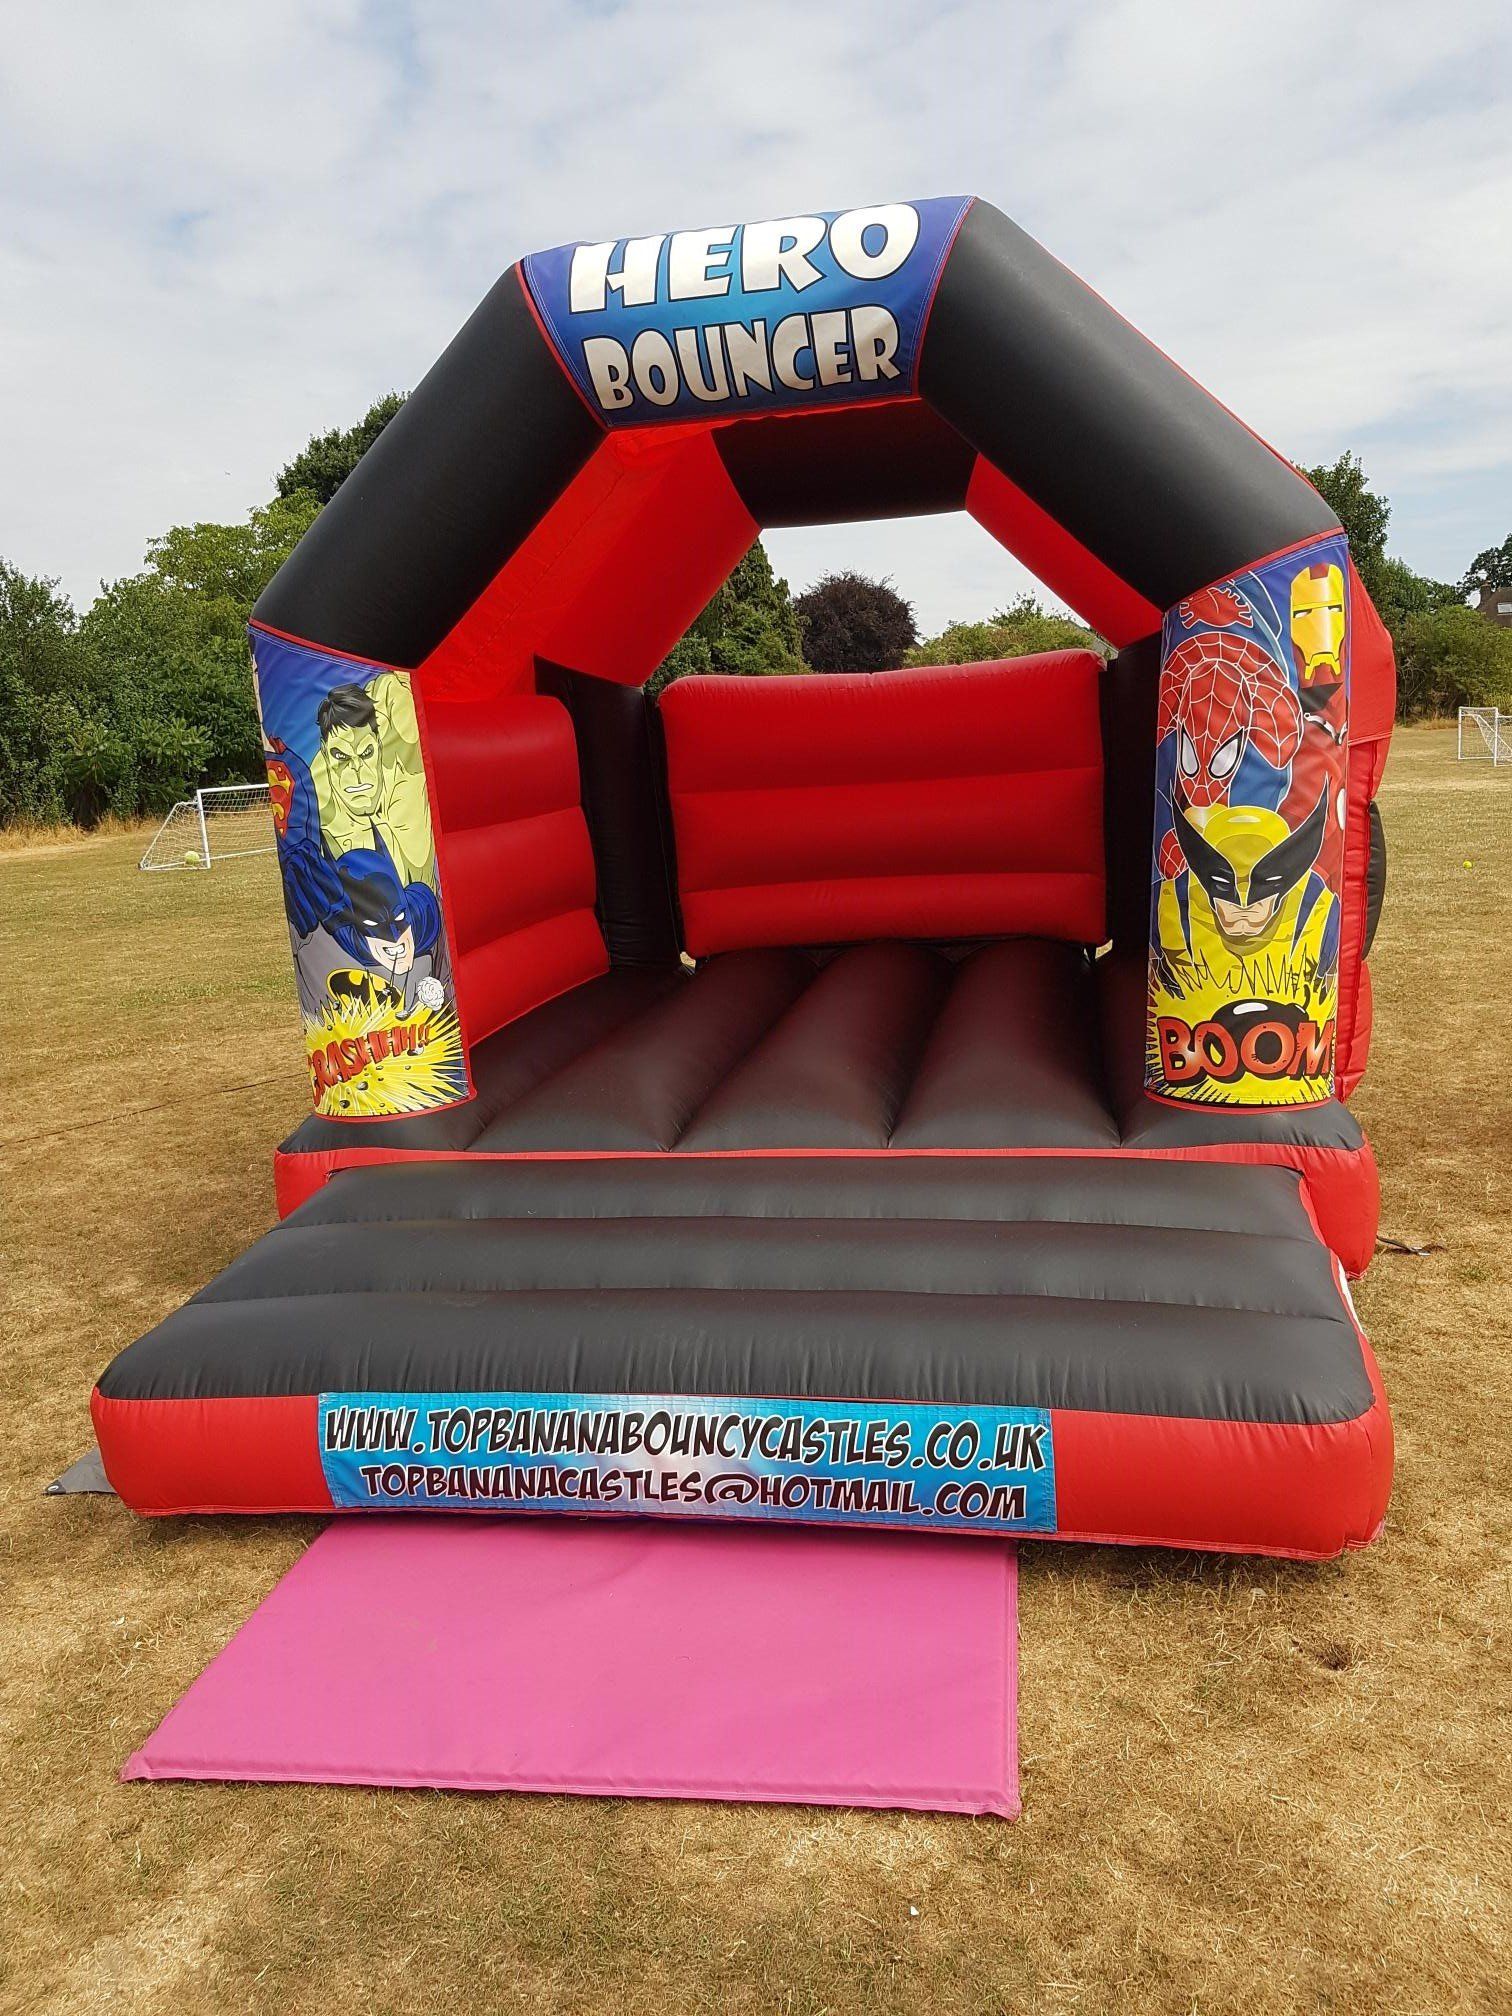 red and black super hero small bouncy castle in a field